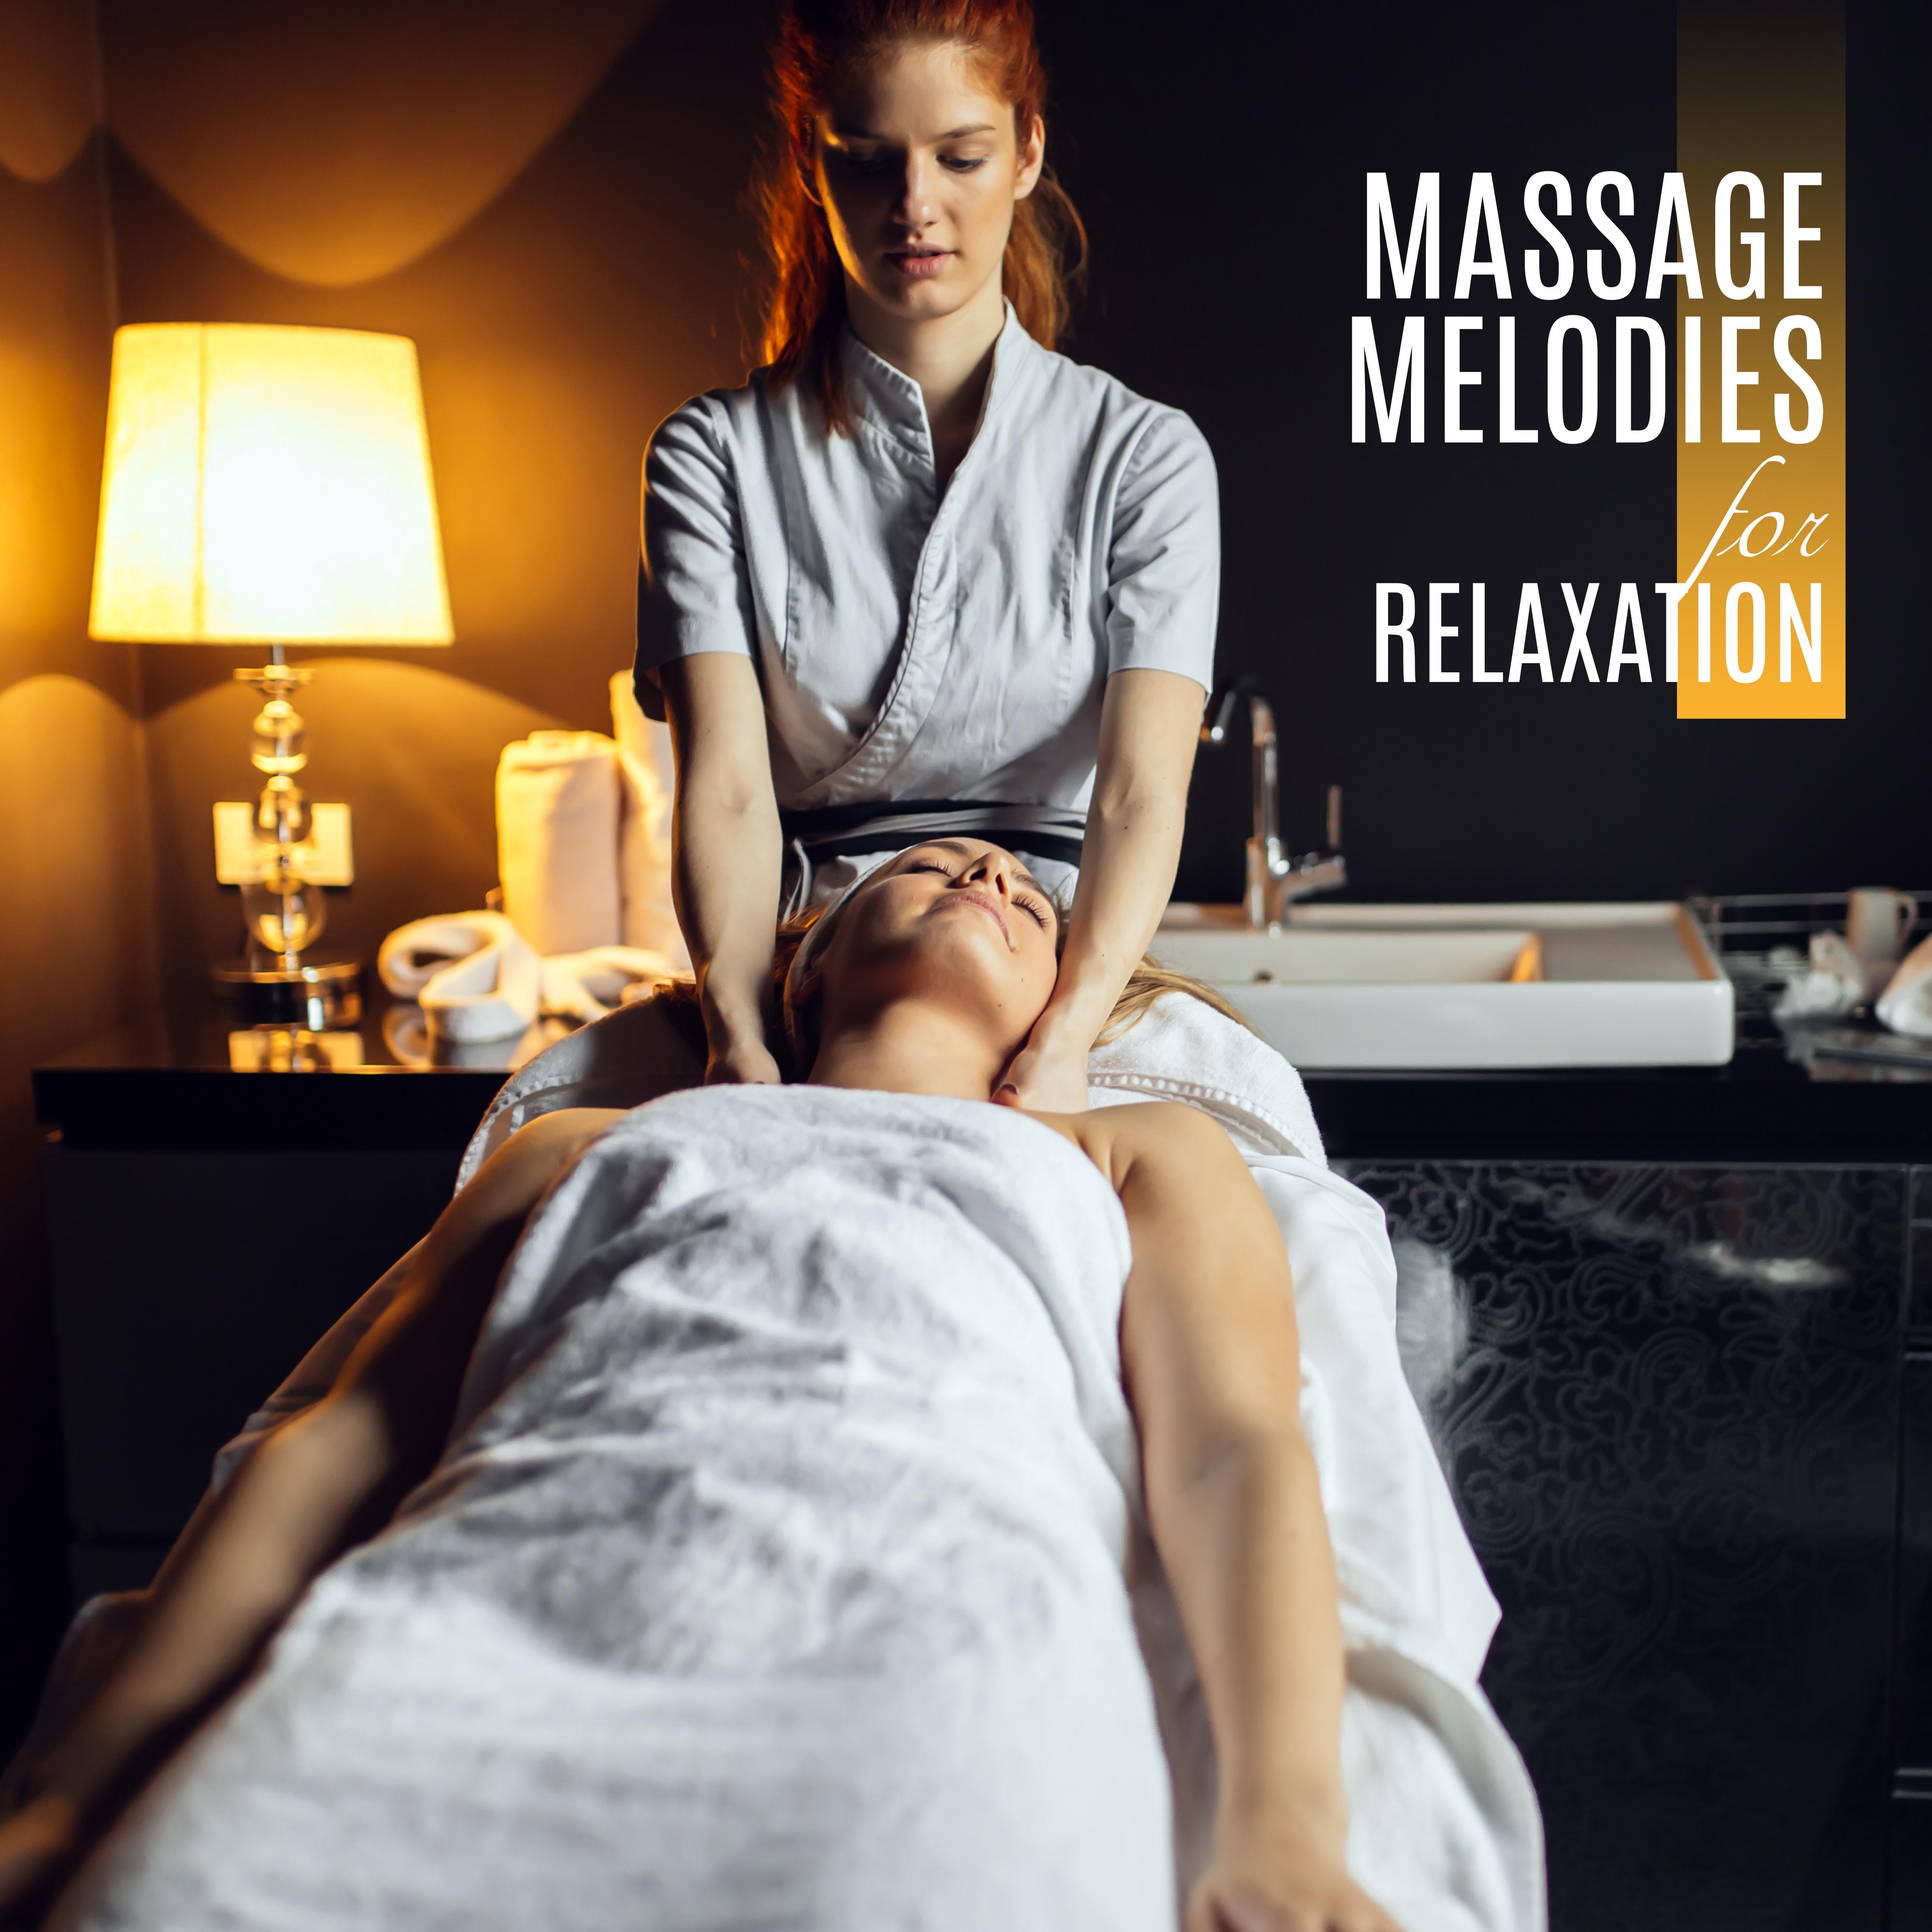 Massage Melodies for Relaxation  Music Reduces Stress, Spa Tunes 2019, Relaxing Music Therapy, Deep Harmony, Wellness Sounds, Healing Music to Calm Down